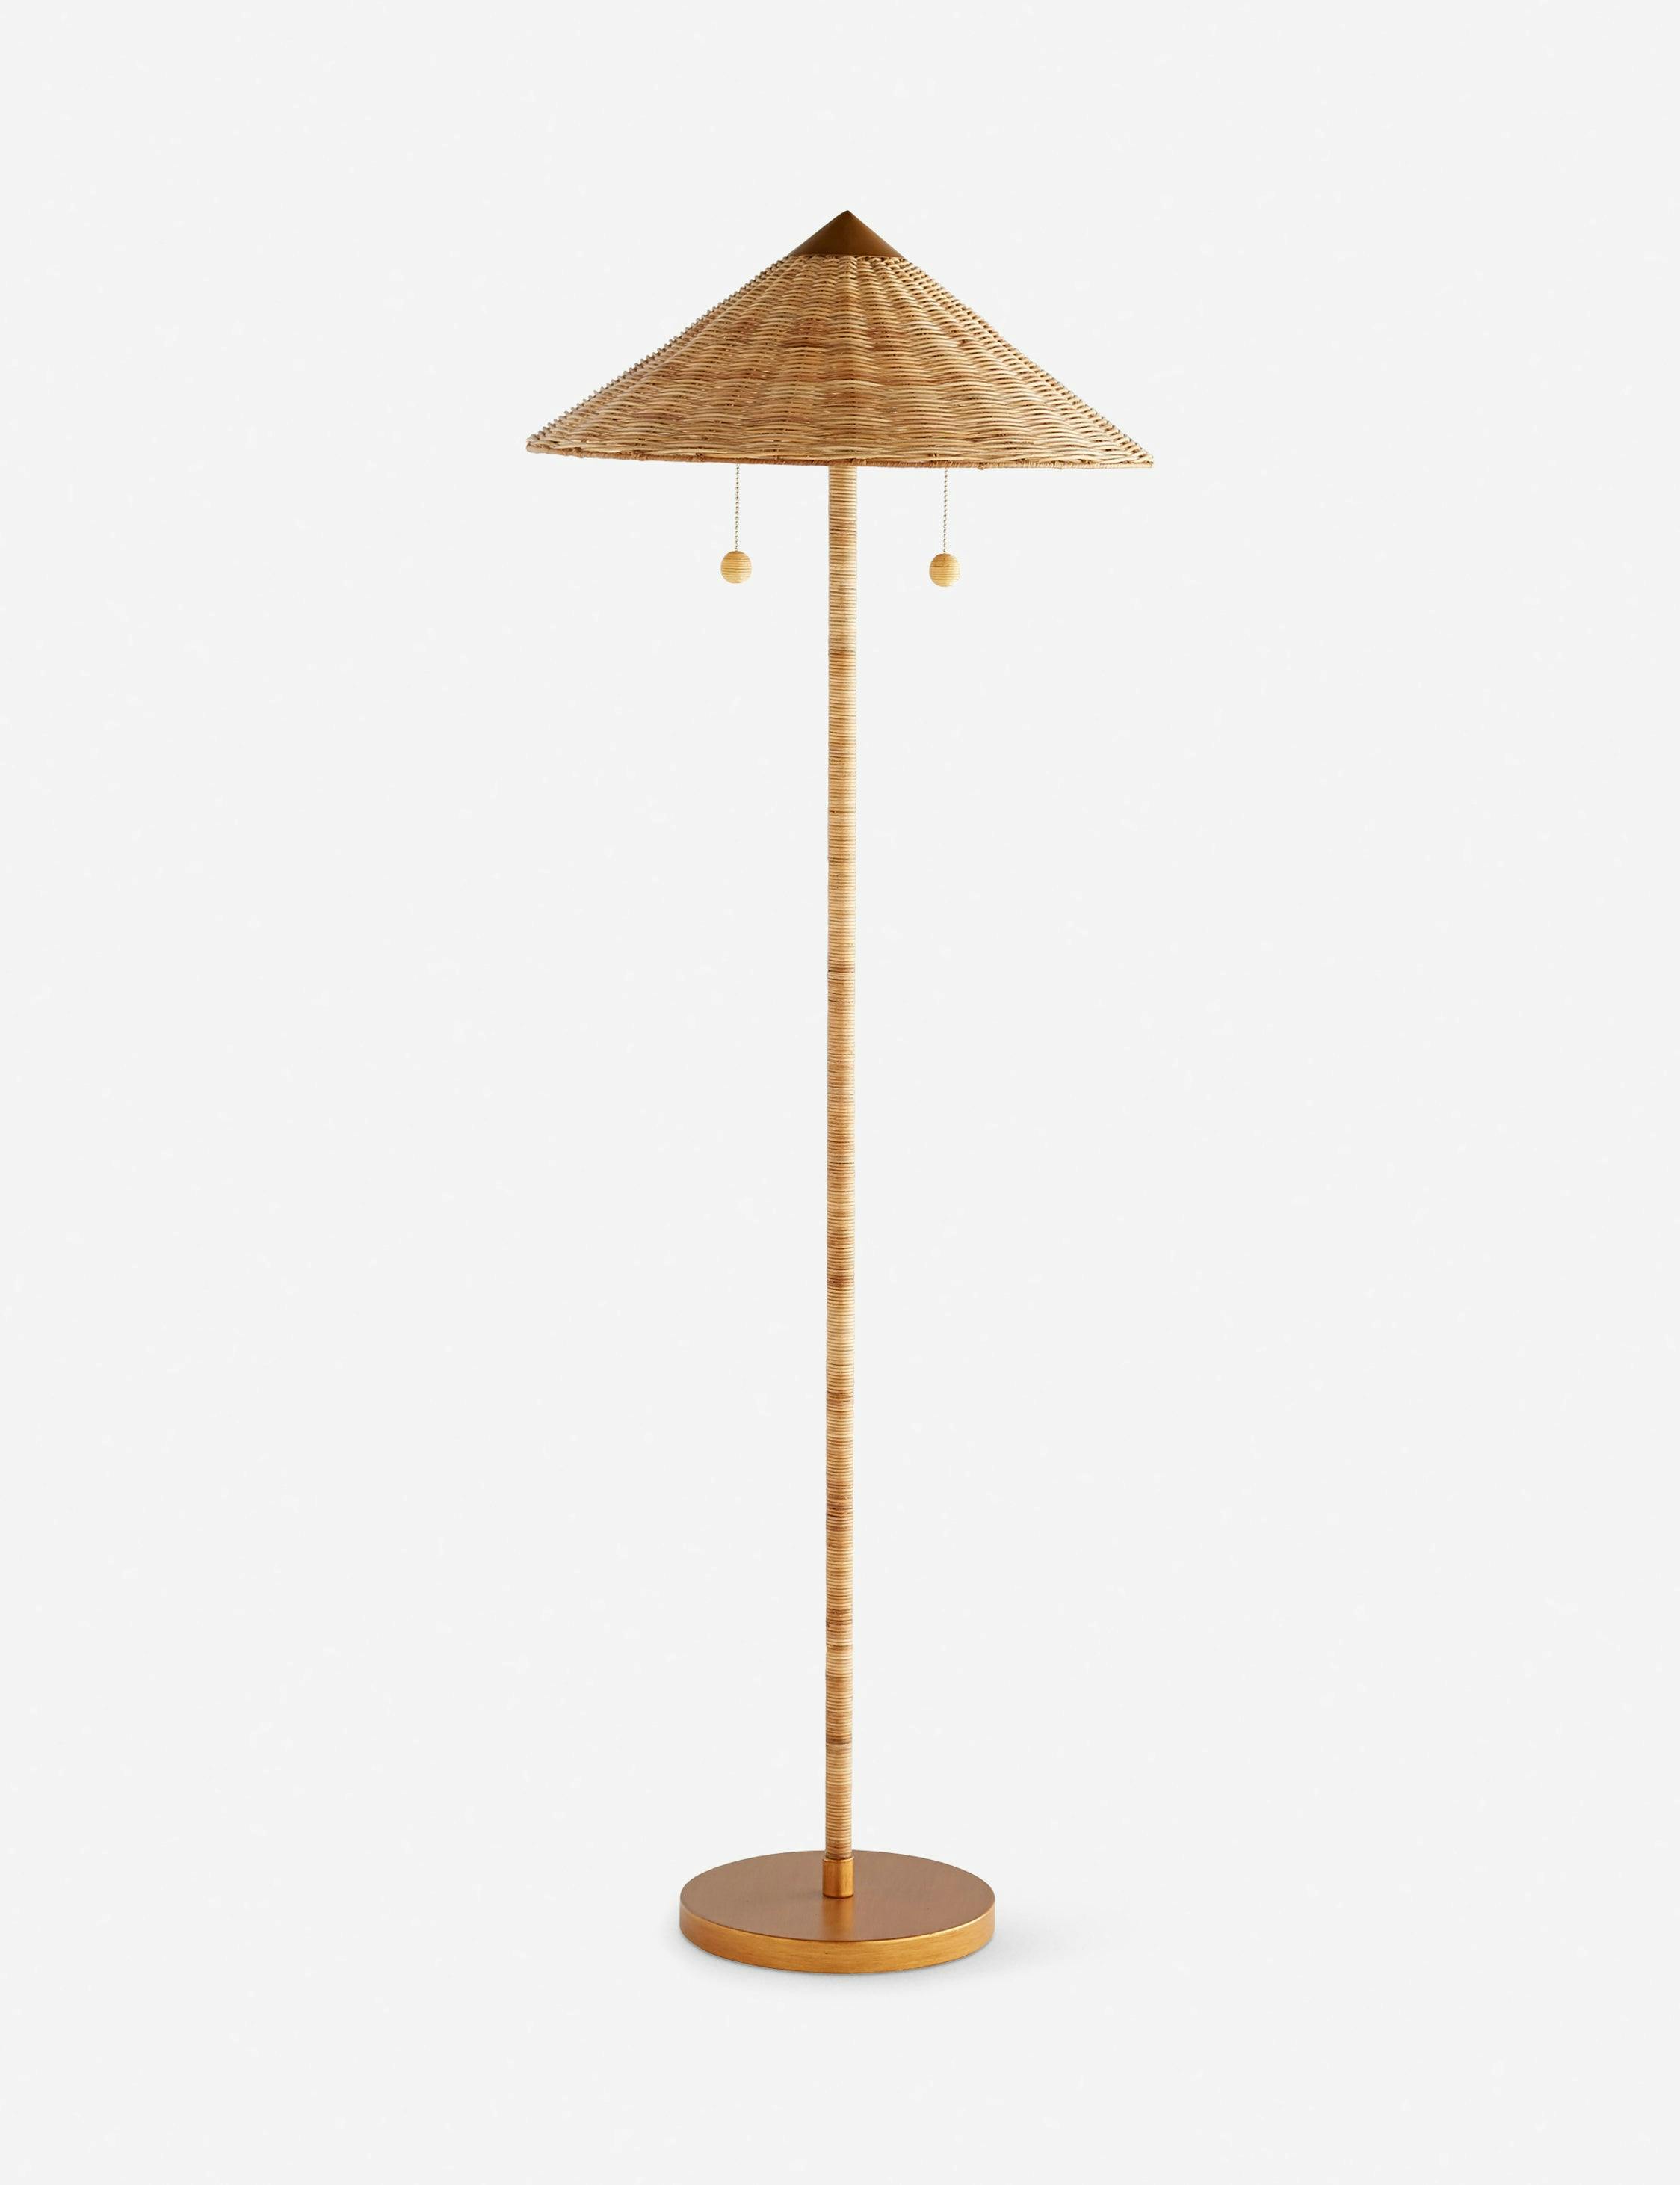 Elegant Rattan and Brass Double Pull Chain Floor Lamp